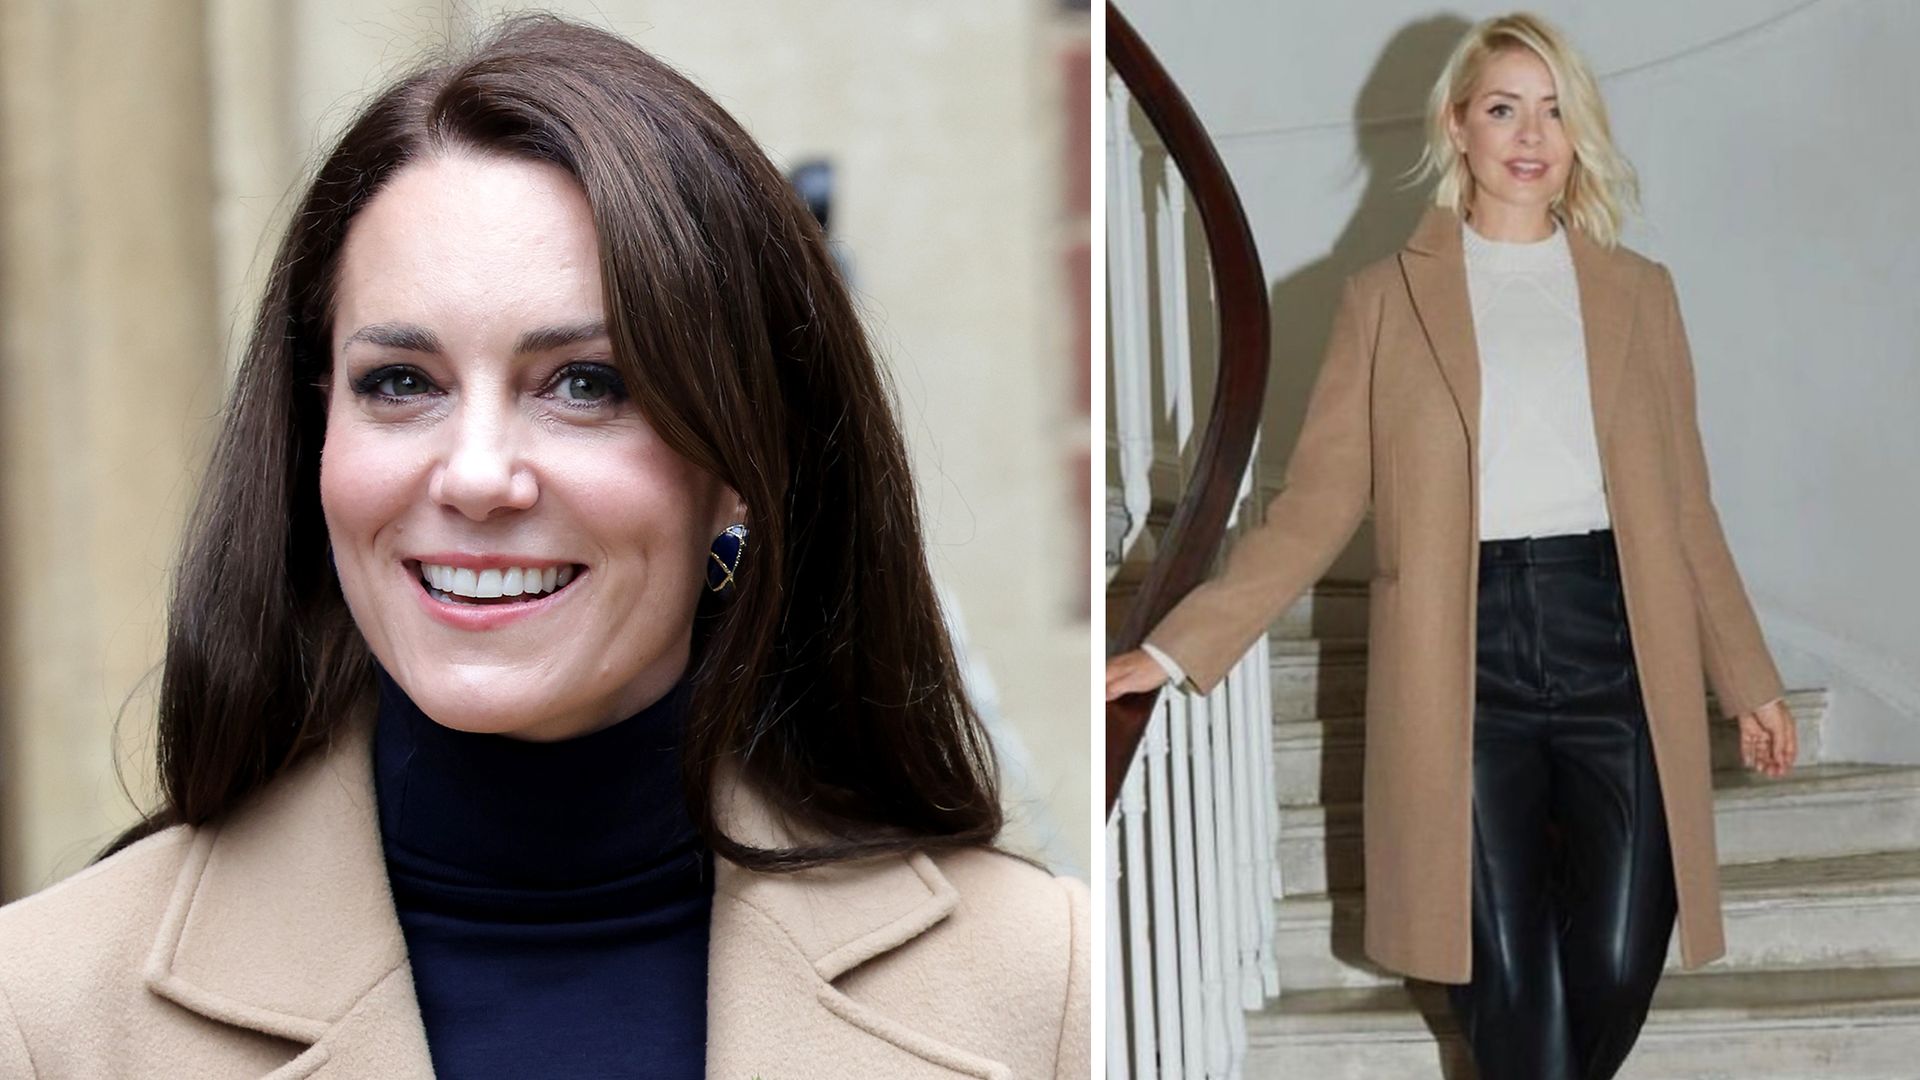 Holly Willoughby's £69 M&S camel coat is very Princess Kate - and it's selling fast